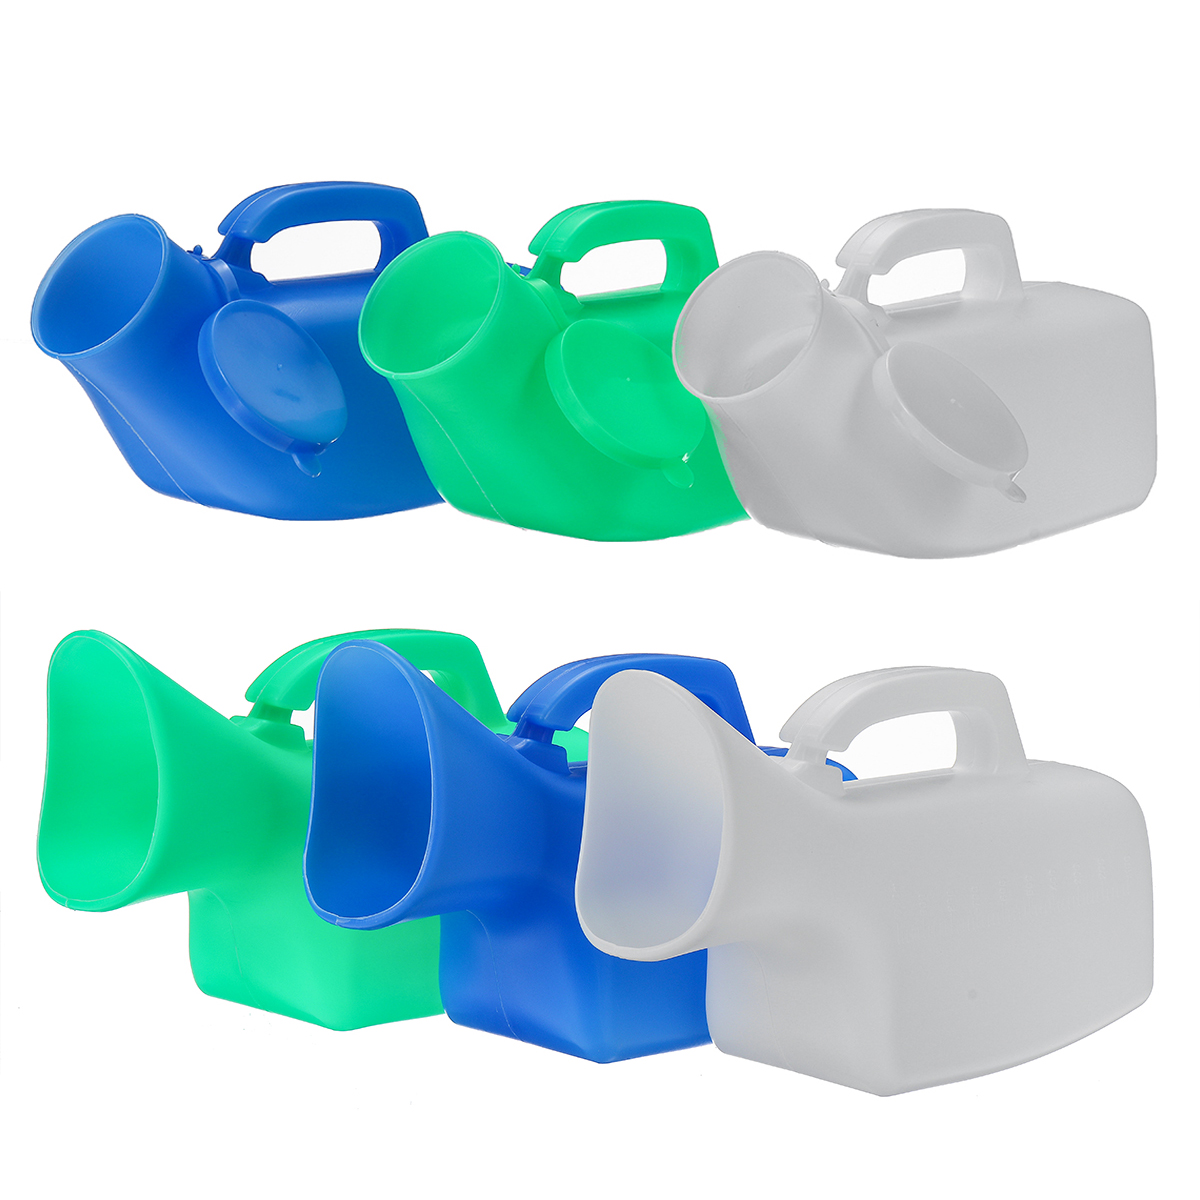 1200ML-Portable-Urinal-Handheld-Urinal-Thickened-Plastic-Urinal-Outdoor-Medical-Men-And-Women-Availa-1857146-3